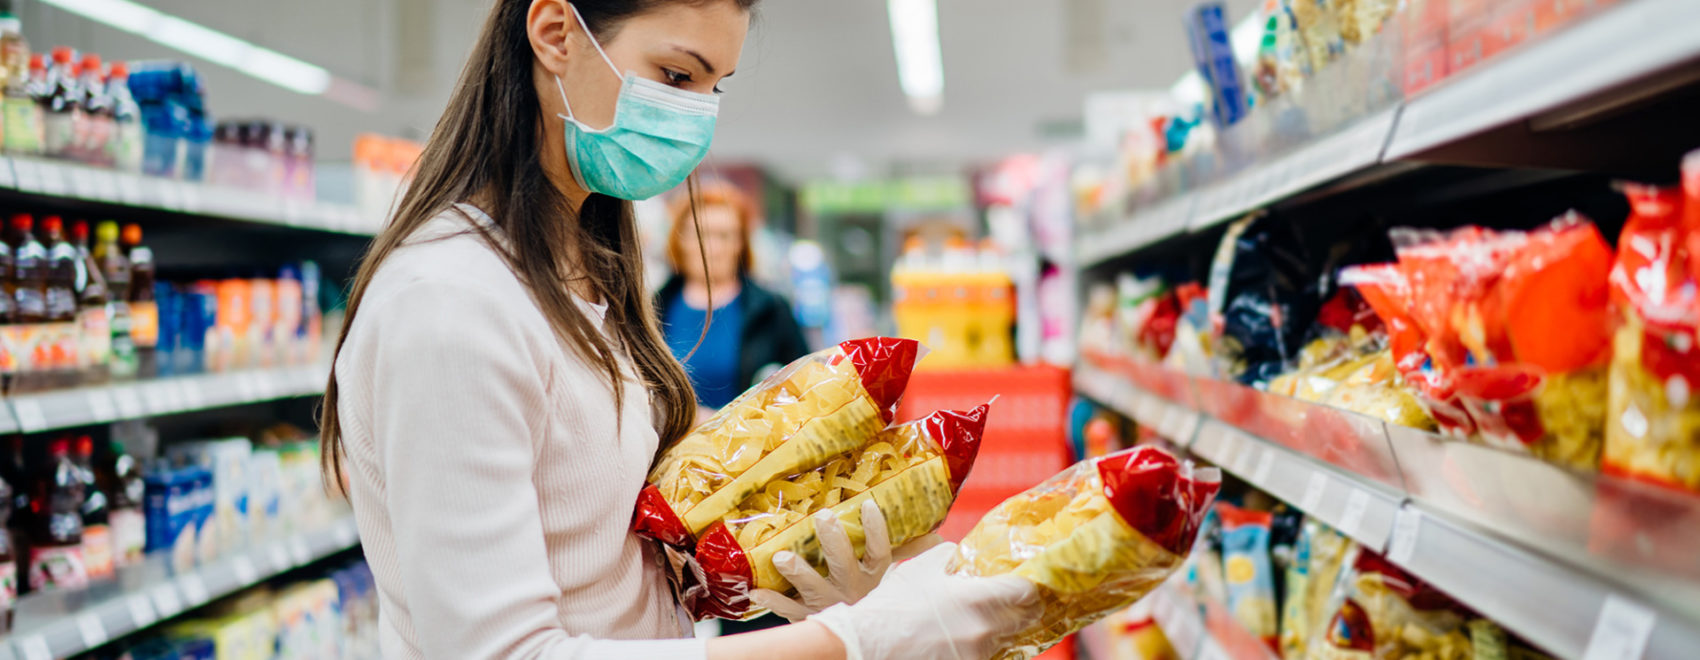 Buyer wearing a protective mask.Shopping during the pandemic qua